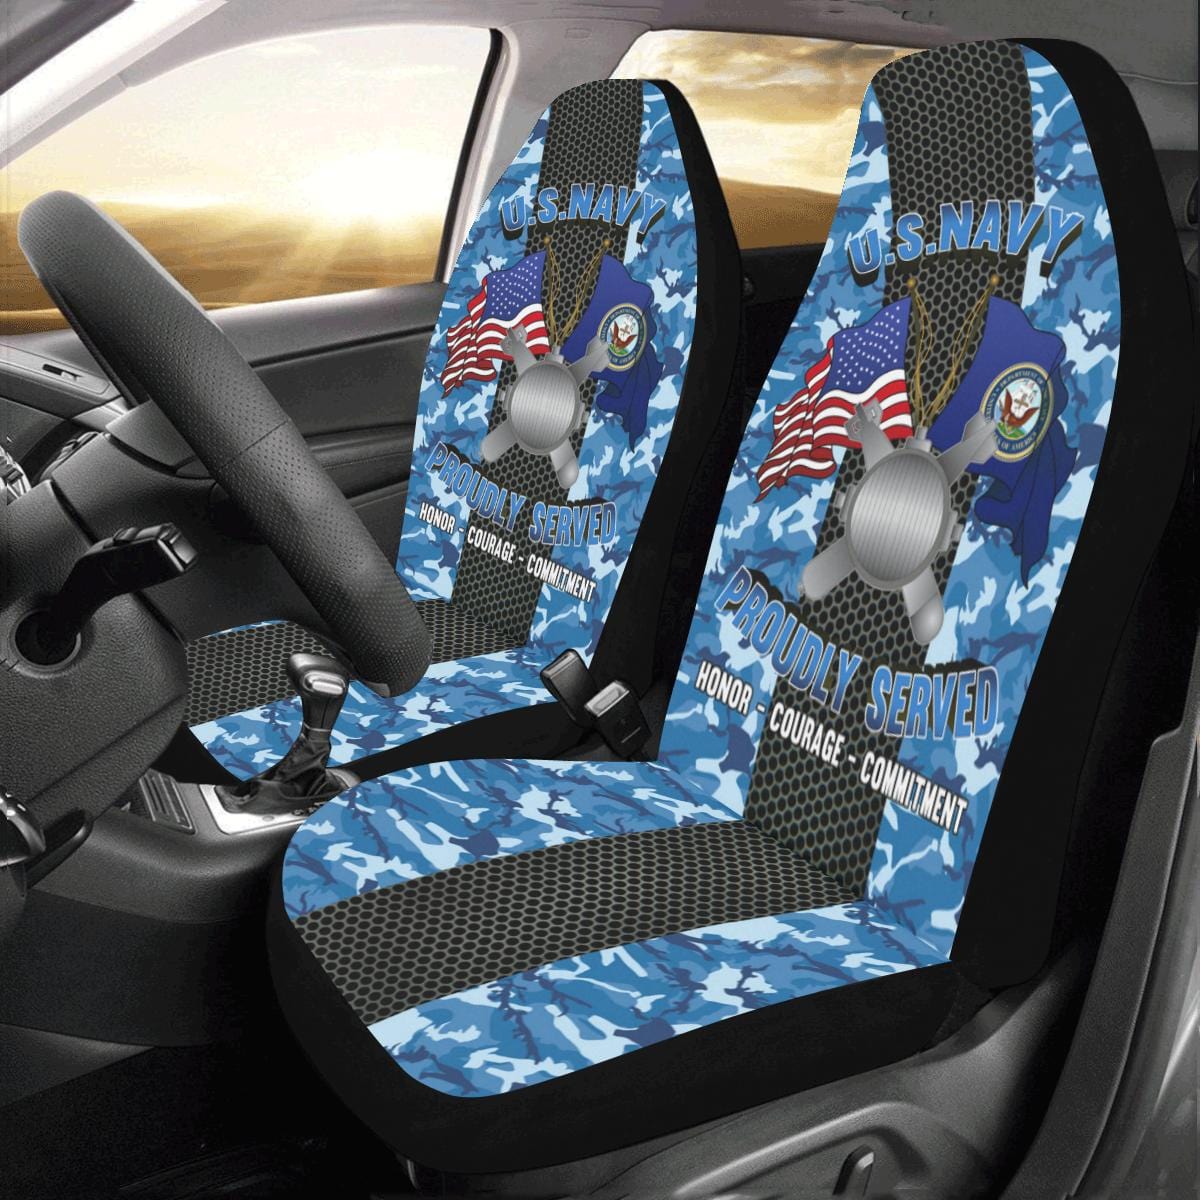 Navy Explosive Ordnance Disposal Navy EOD Car Seat Covers (Set of 2)-SeatCovers-Navy-Rate-Veterans Nation